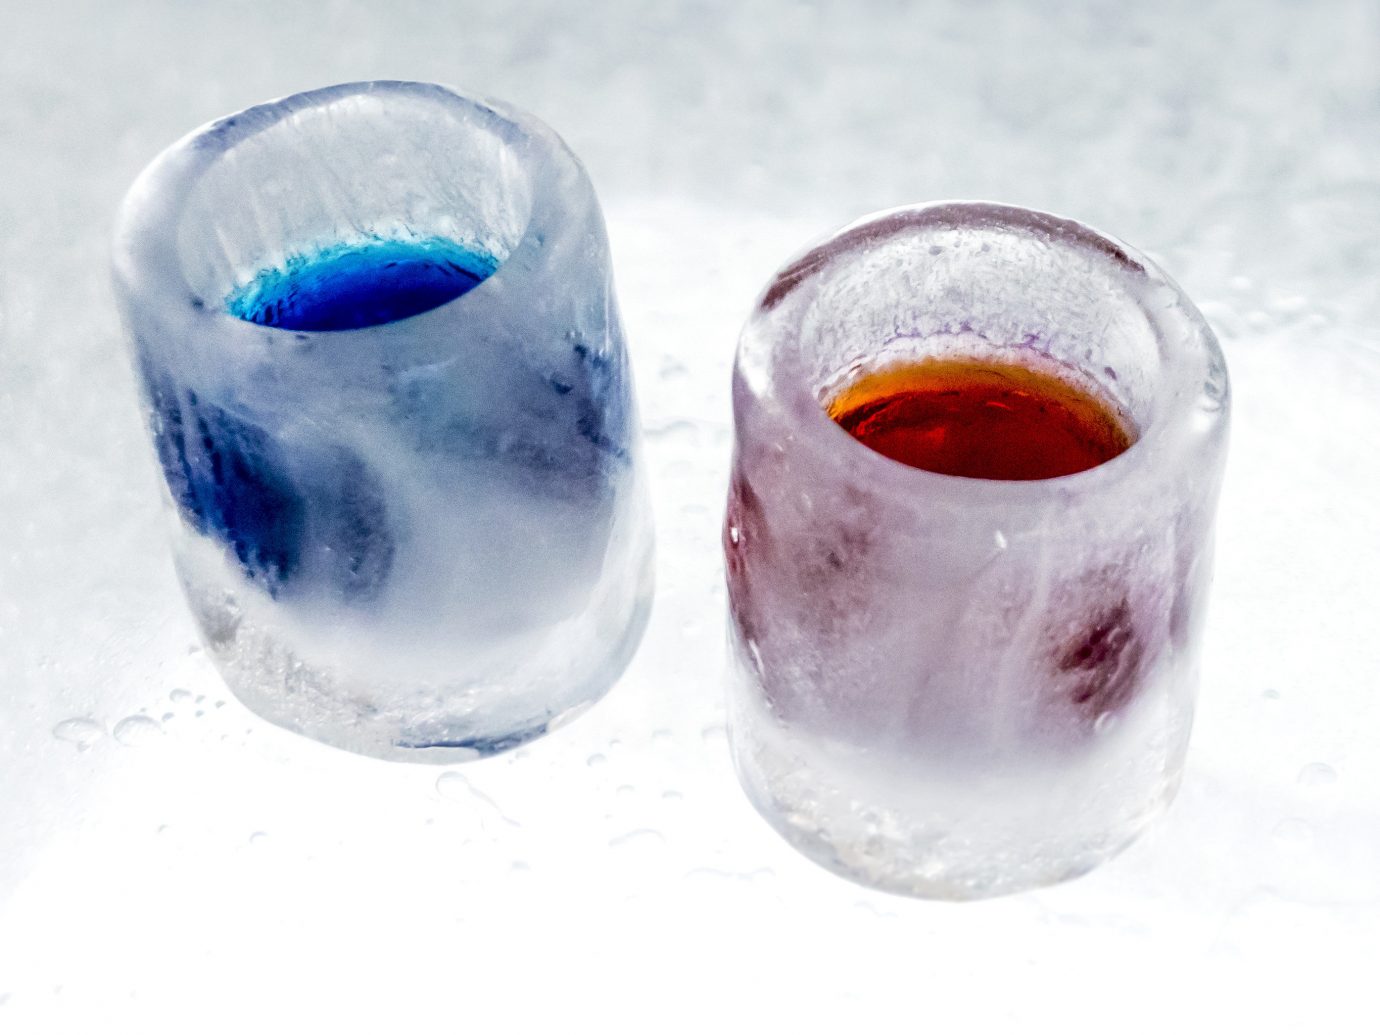 glasses made of ice at The Snowcastle Of Kemi, Finland